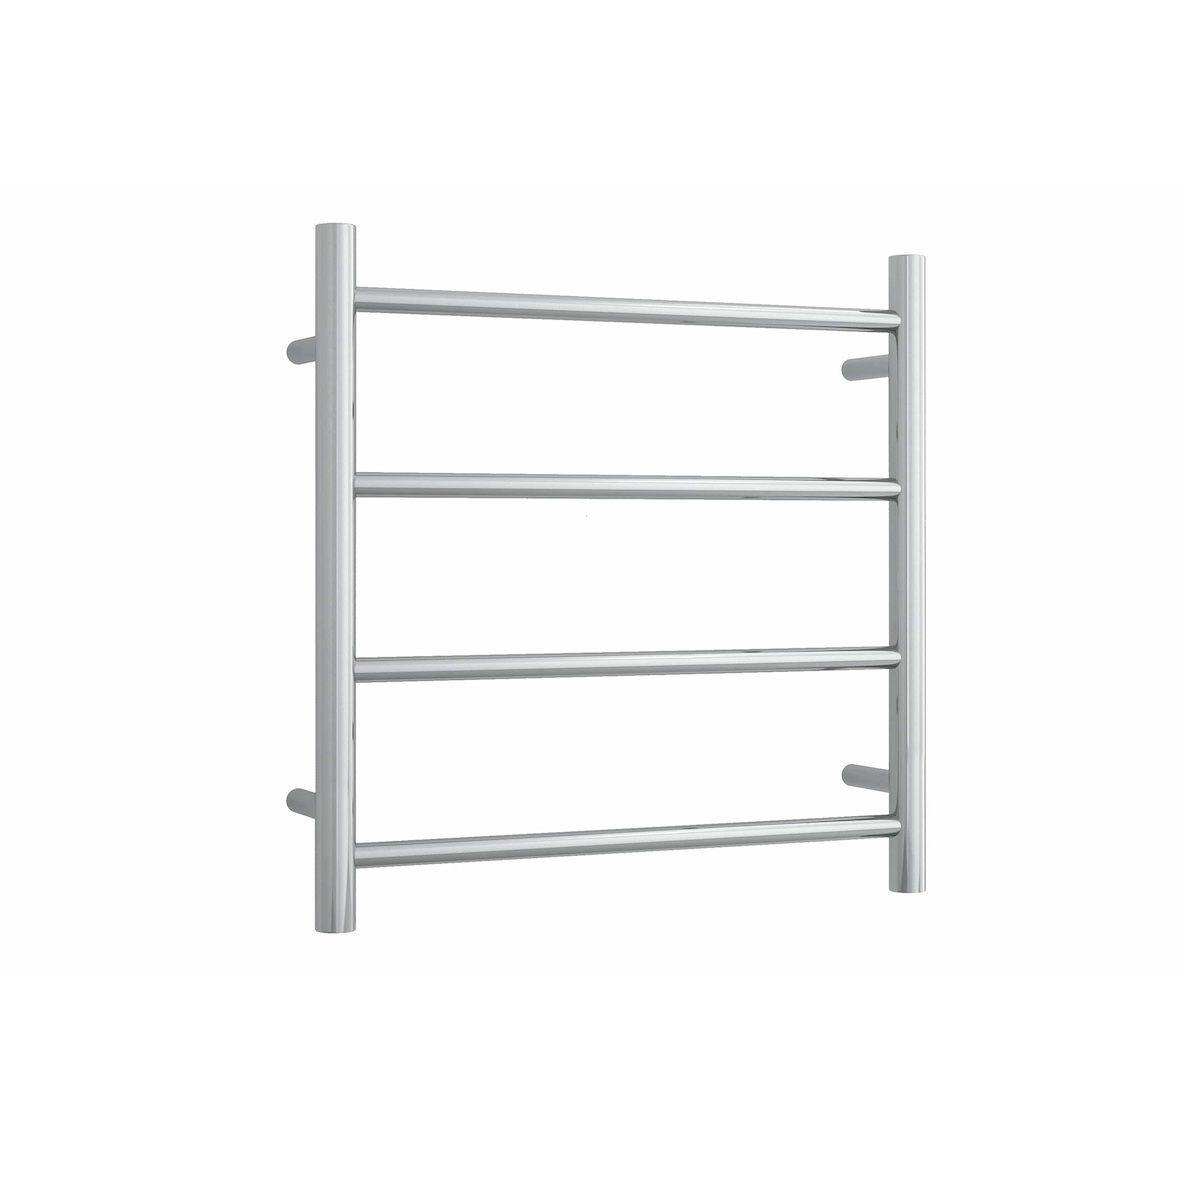 Polished SS finish heated towel ladder from Infinity Plus bathrooms deliver AU wide